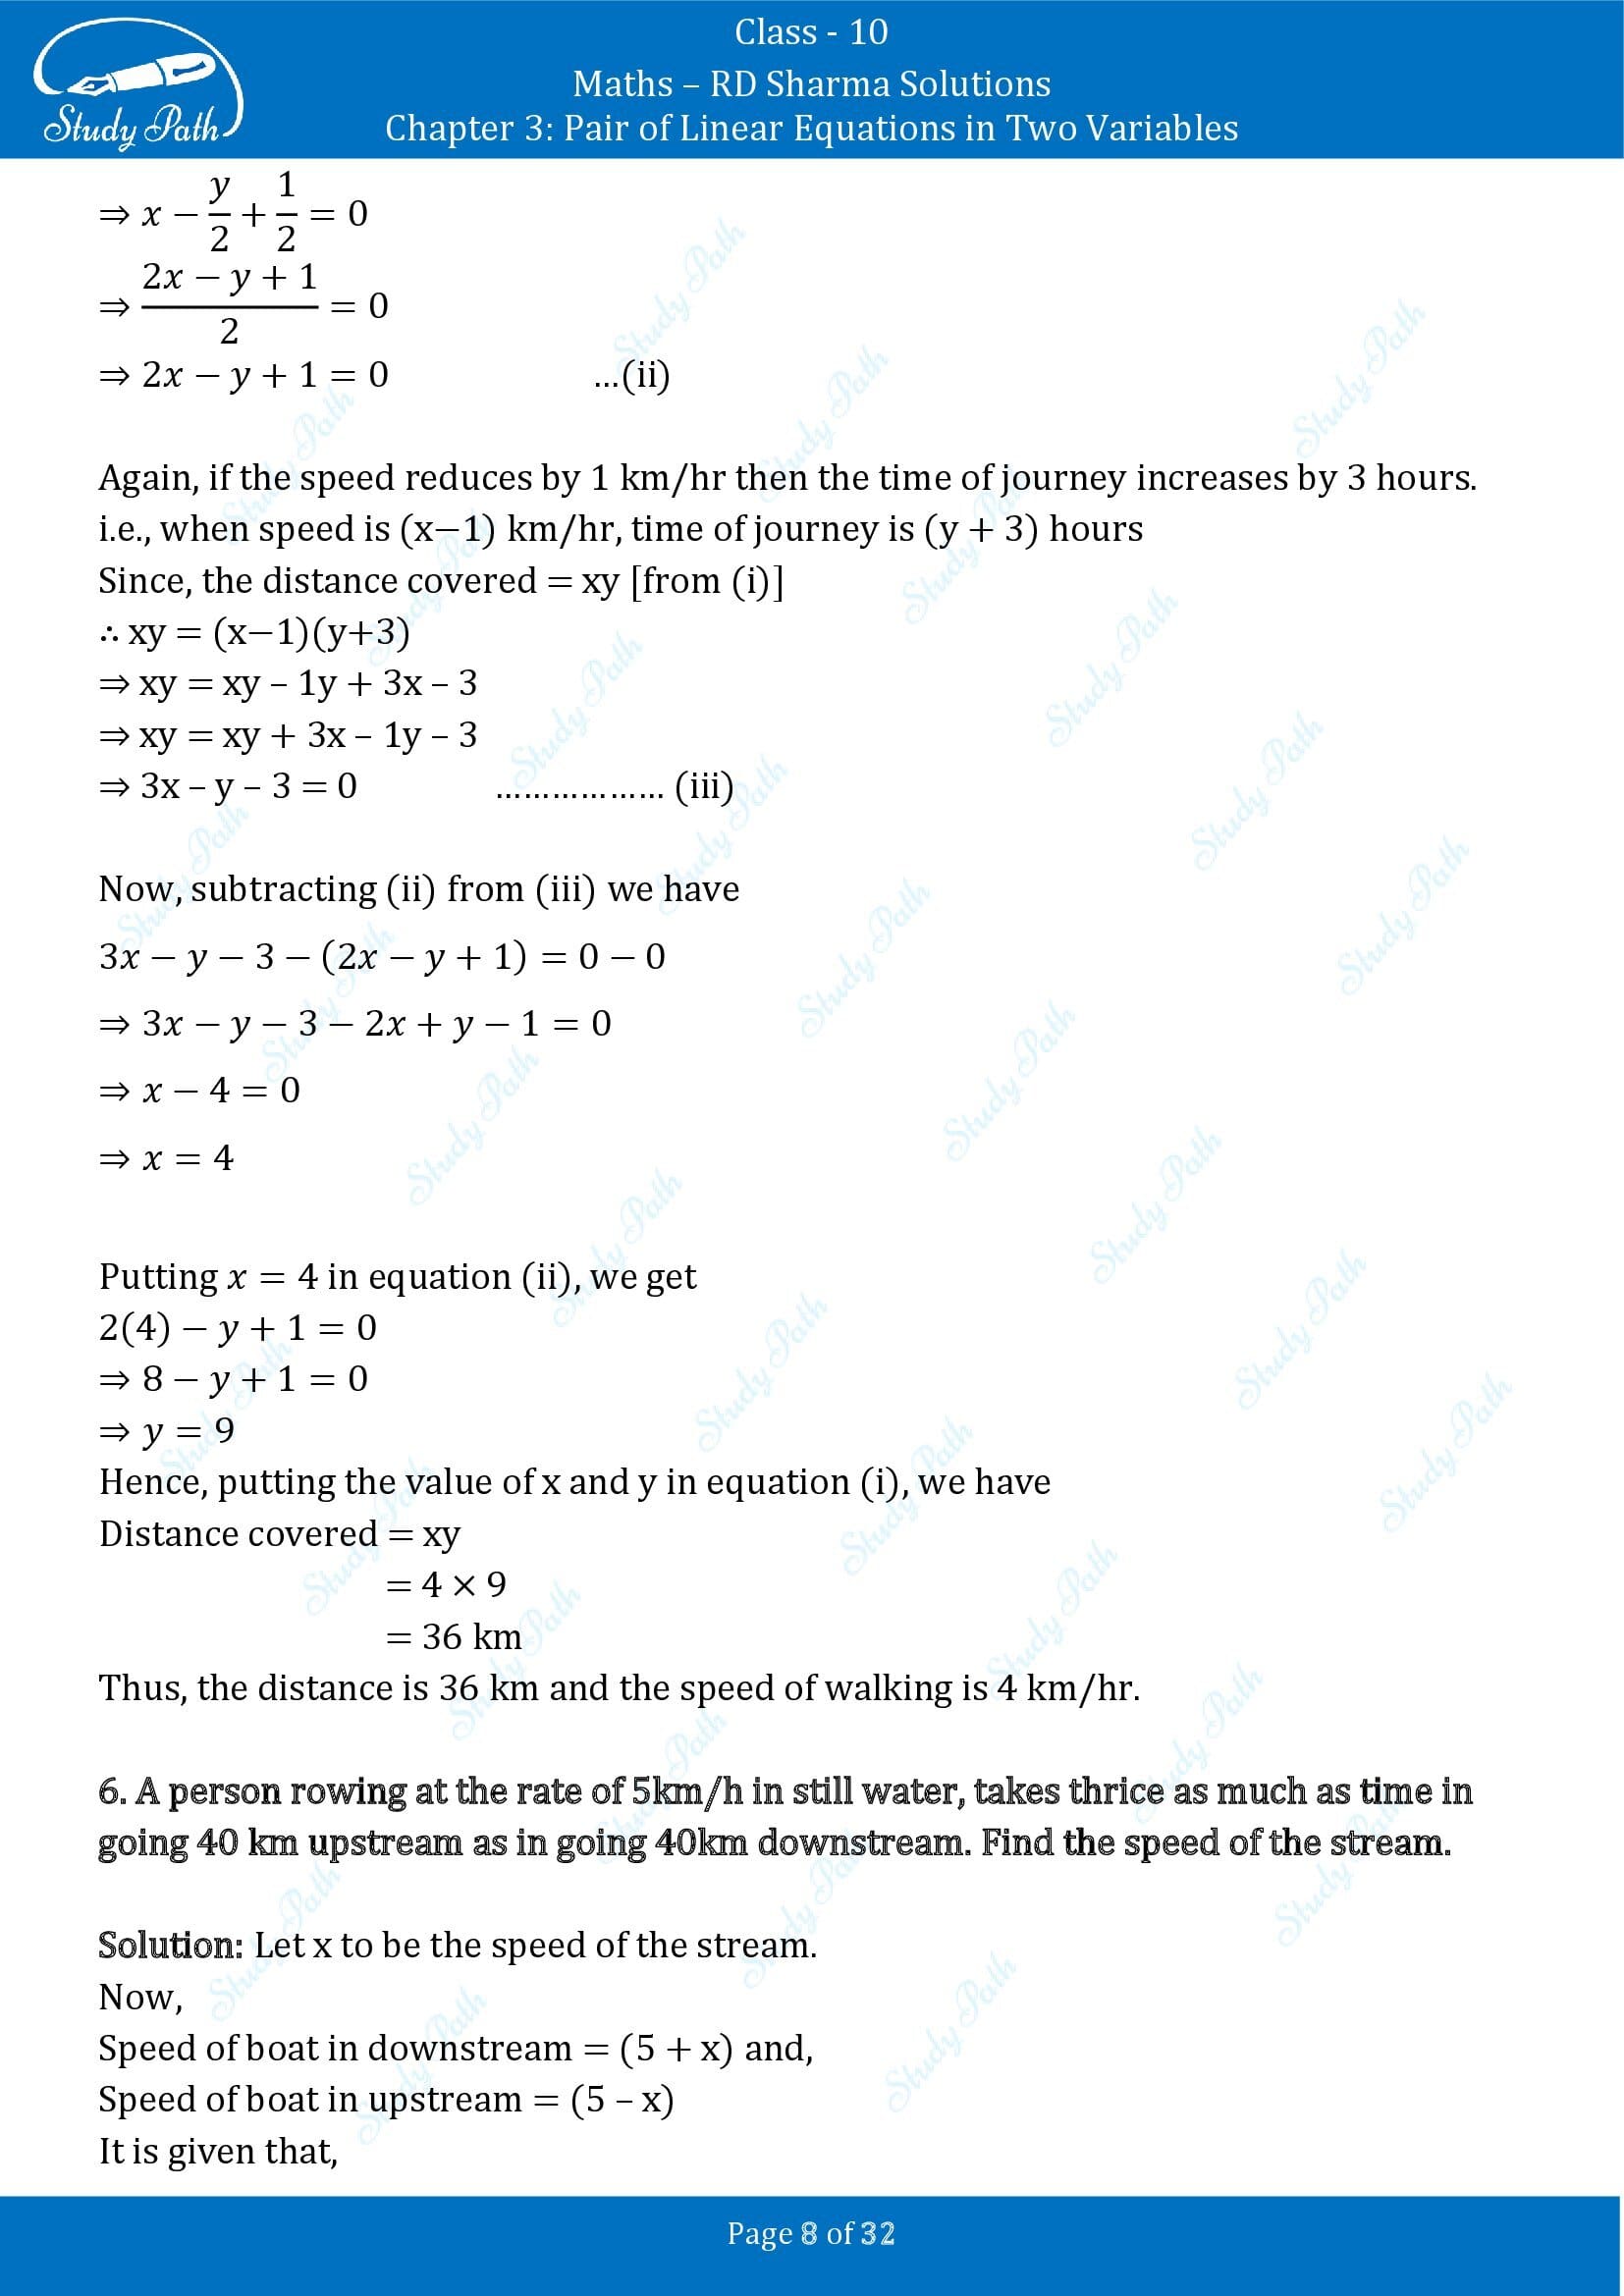 RD Sharma Solutions Class 10 Chapter 3 Pair of Linear Equations in Two Variables Exercise 3.10 00008